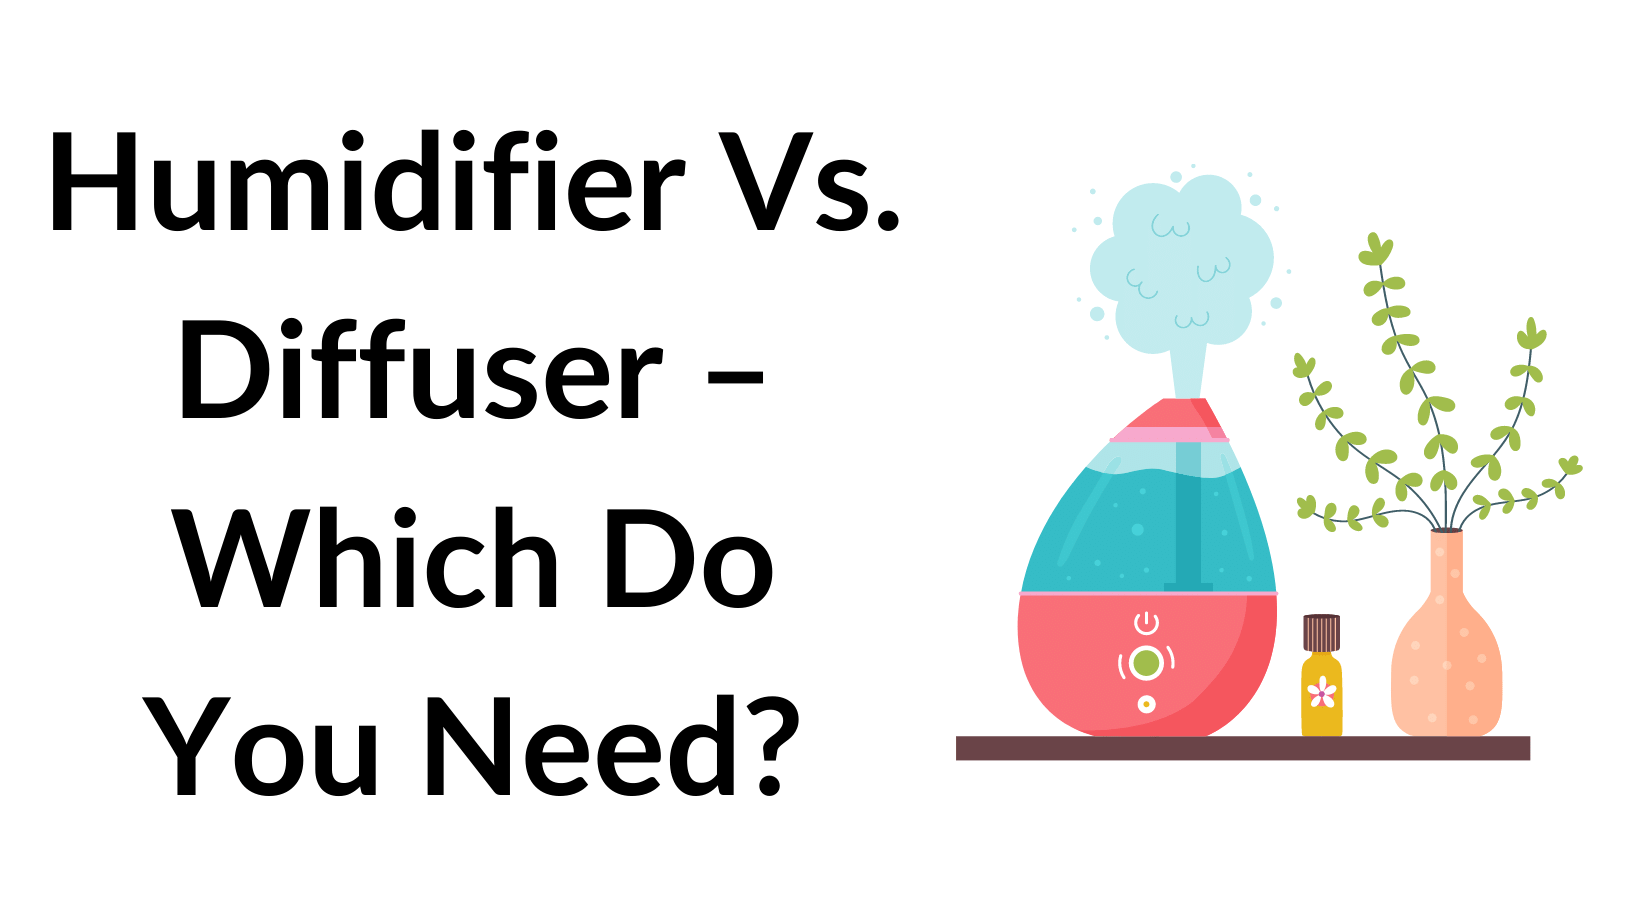 Humidifier Vs. Diffuser – Which Do You Need?